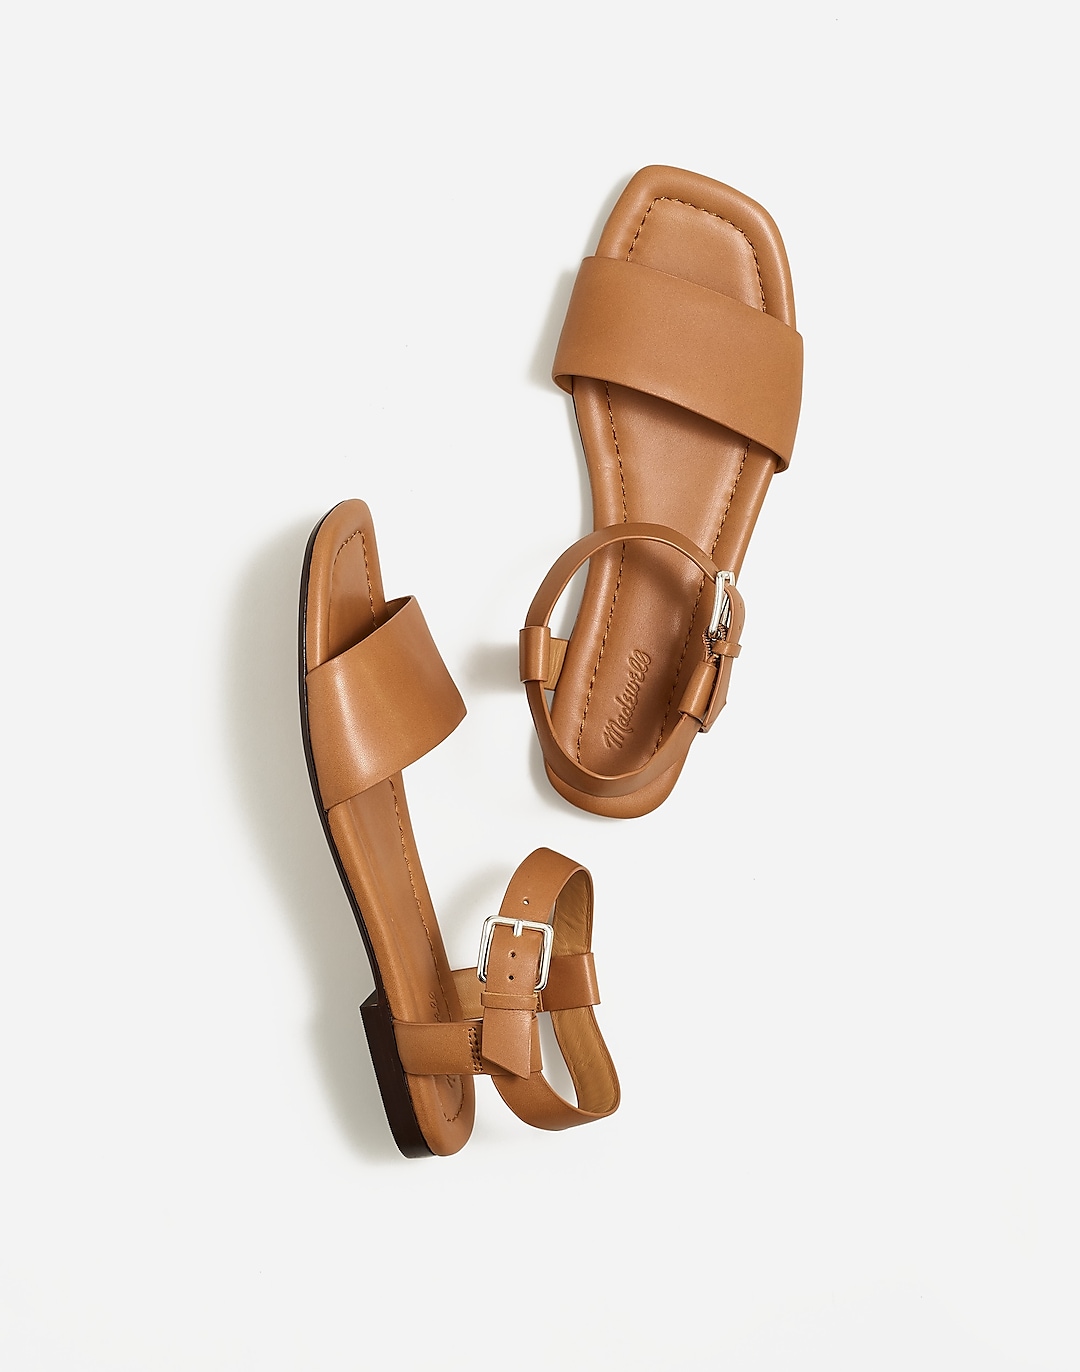 The Karla Ankle-Strap Sandal in Leather | Madewell